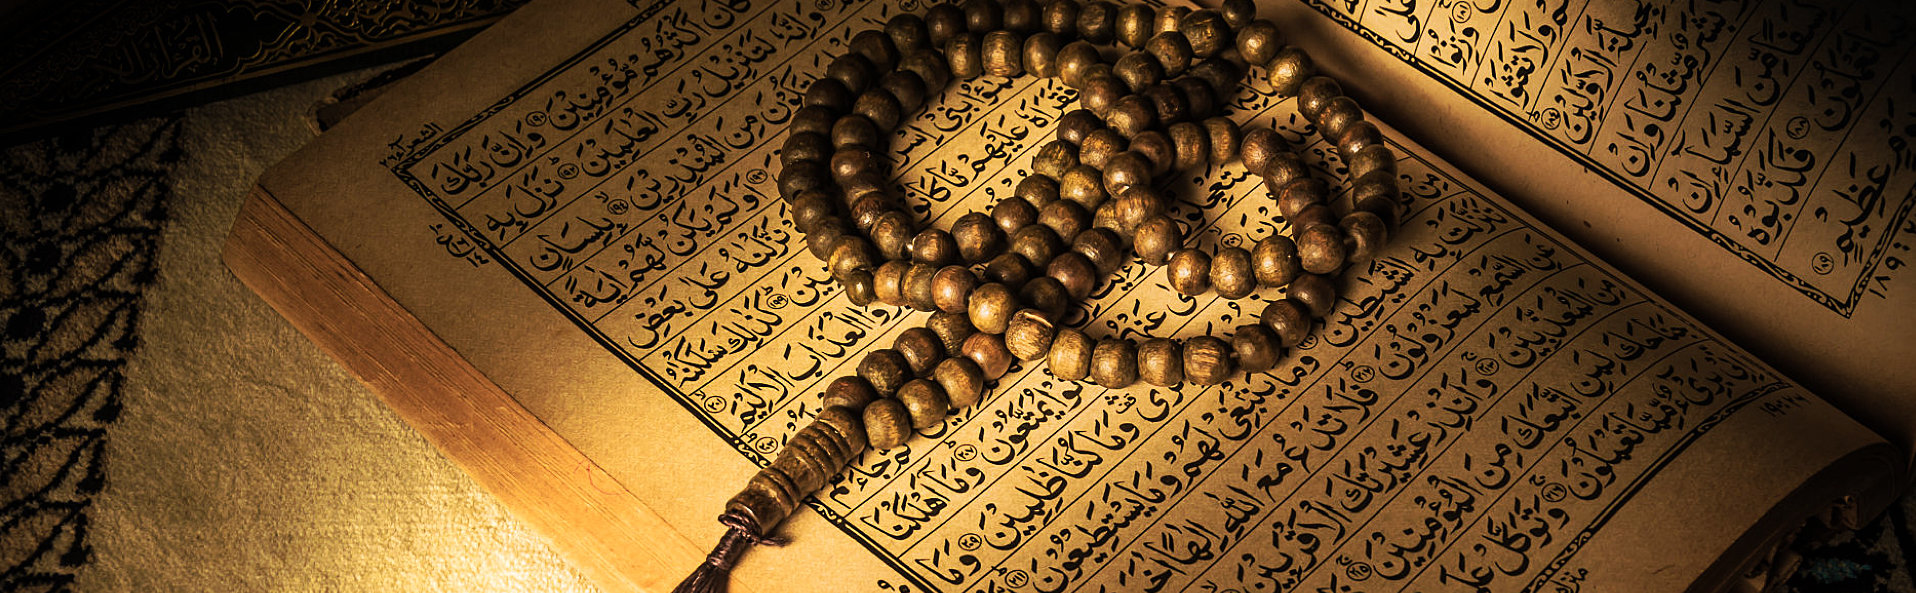 prayer beads on holy book of muslims